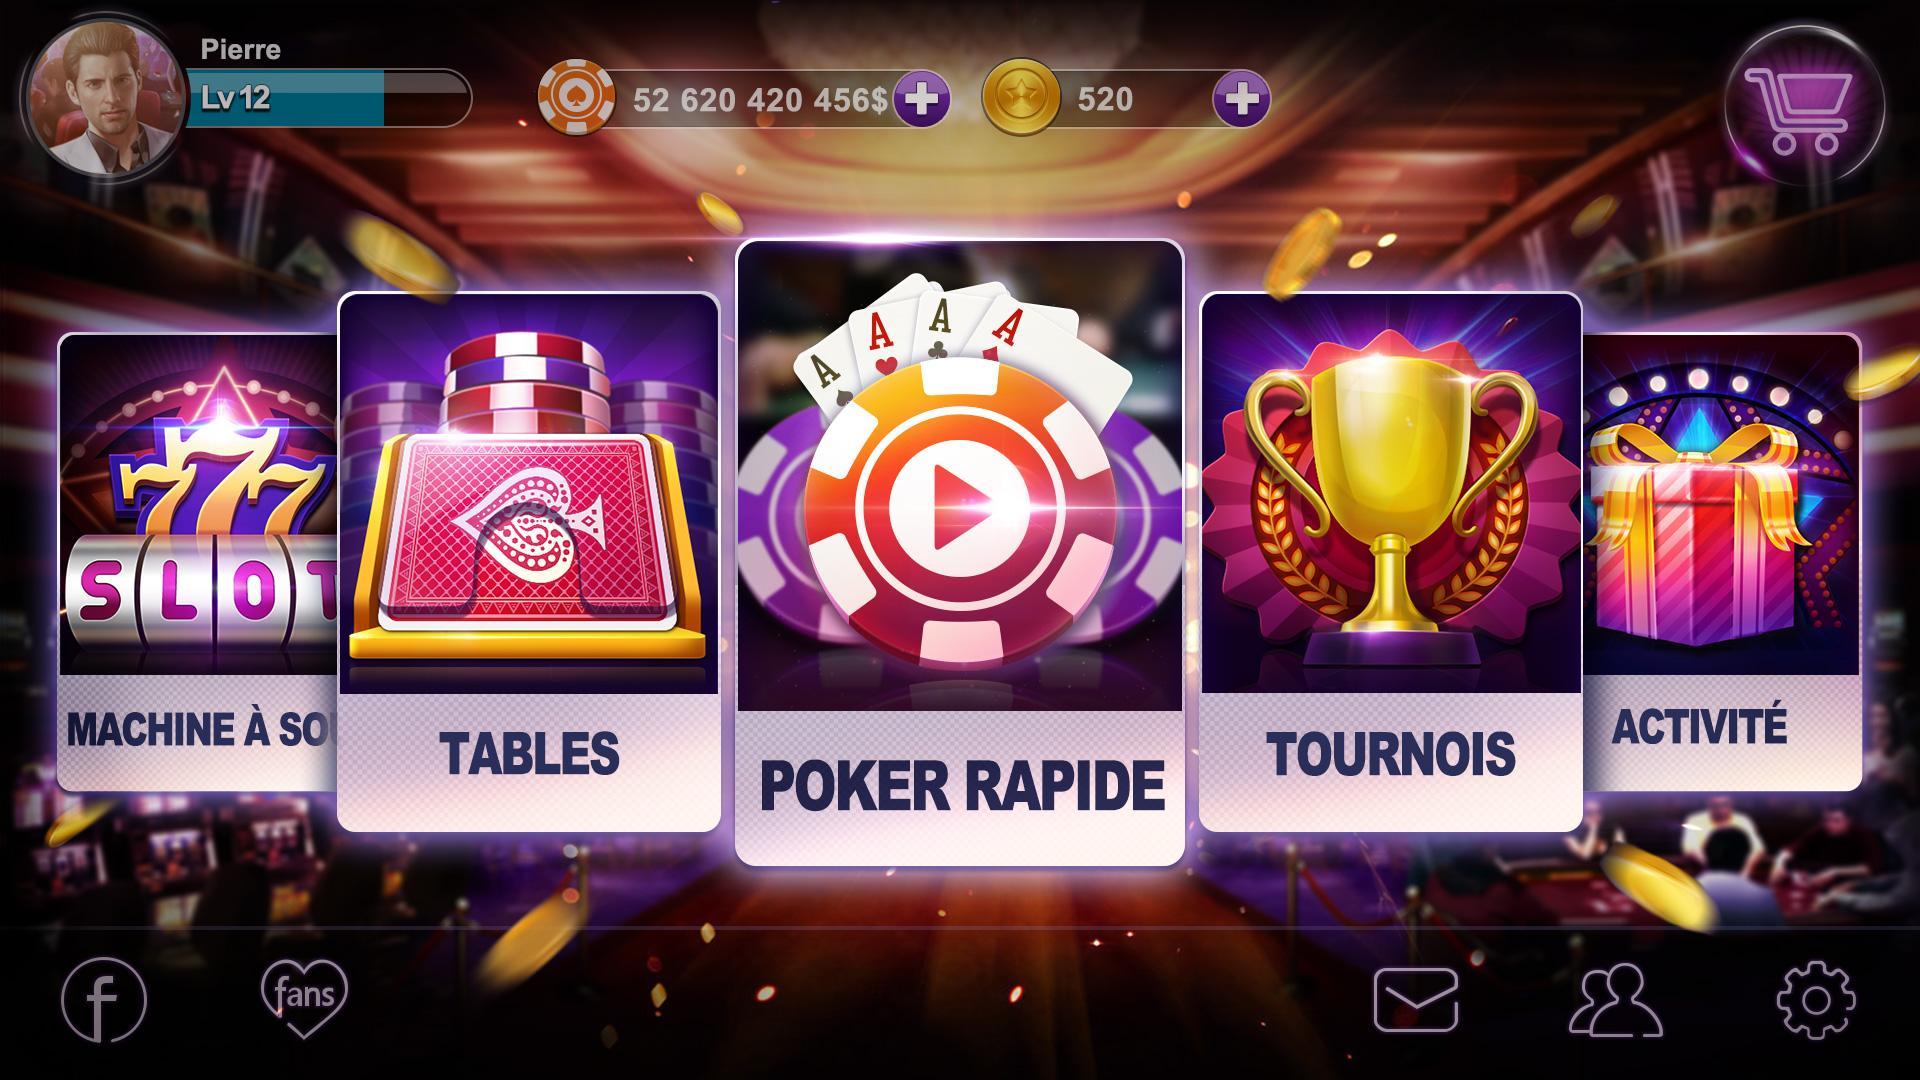 Poker France for Android - APK Download